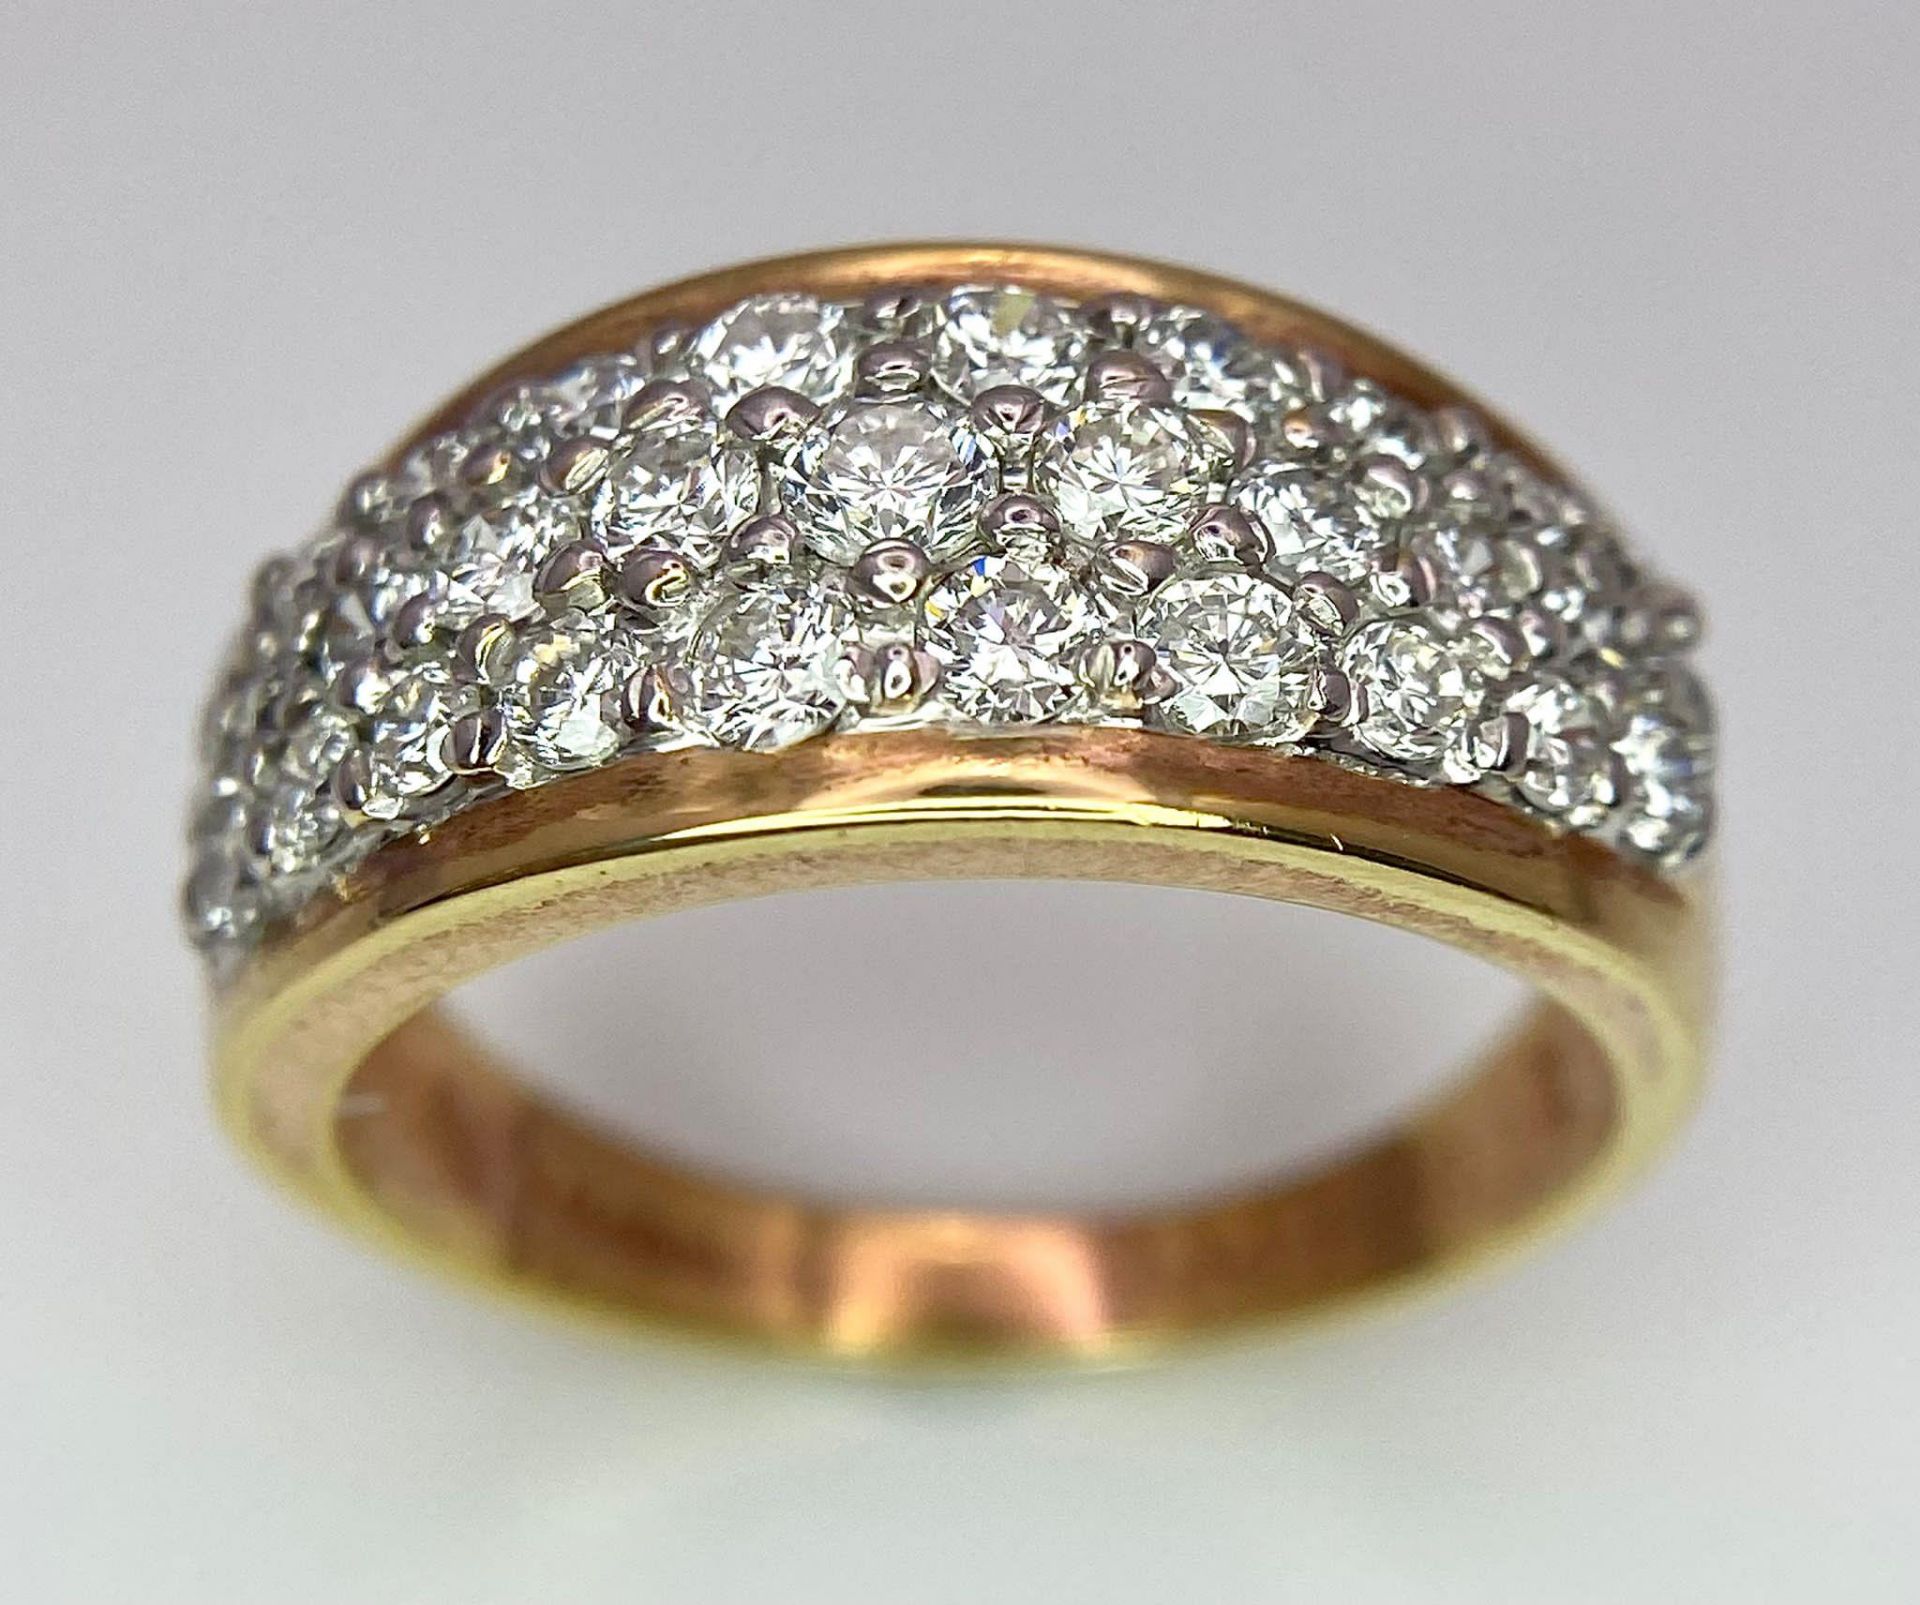 An 18K Yellow Gold Three-Row Cluster Ring. 1ctw. Size M. 5.5g total weight. - Image 9 of 15